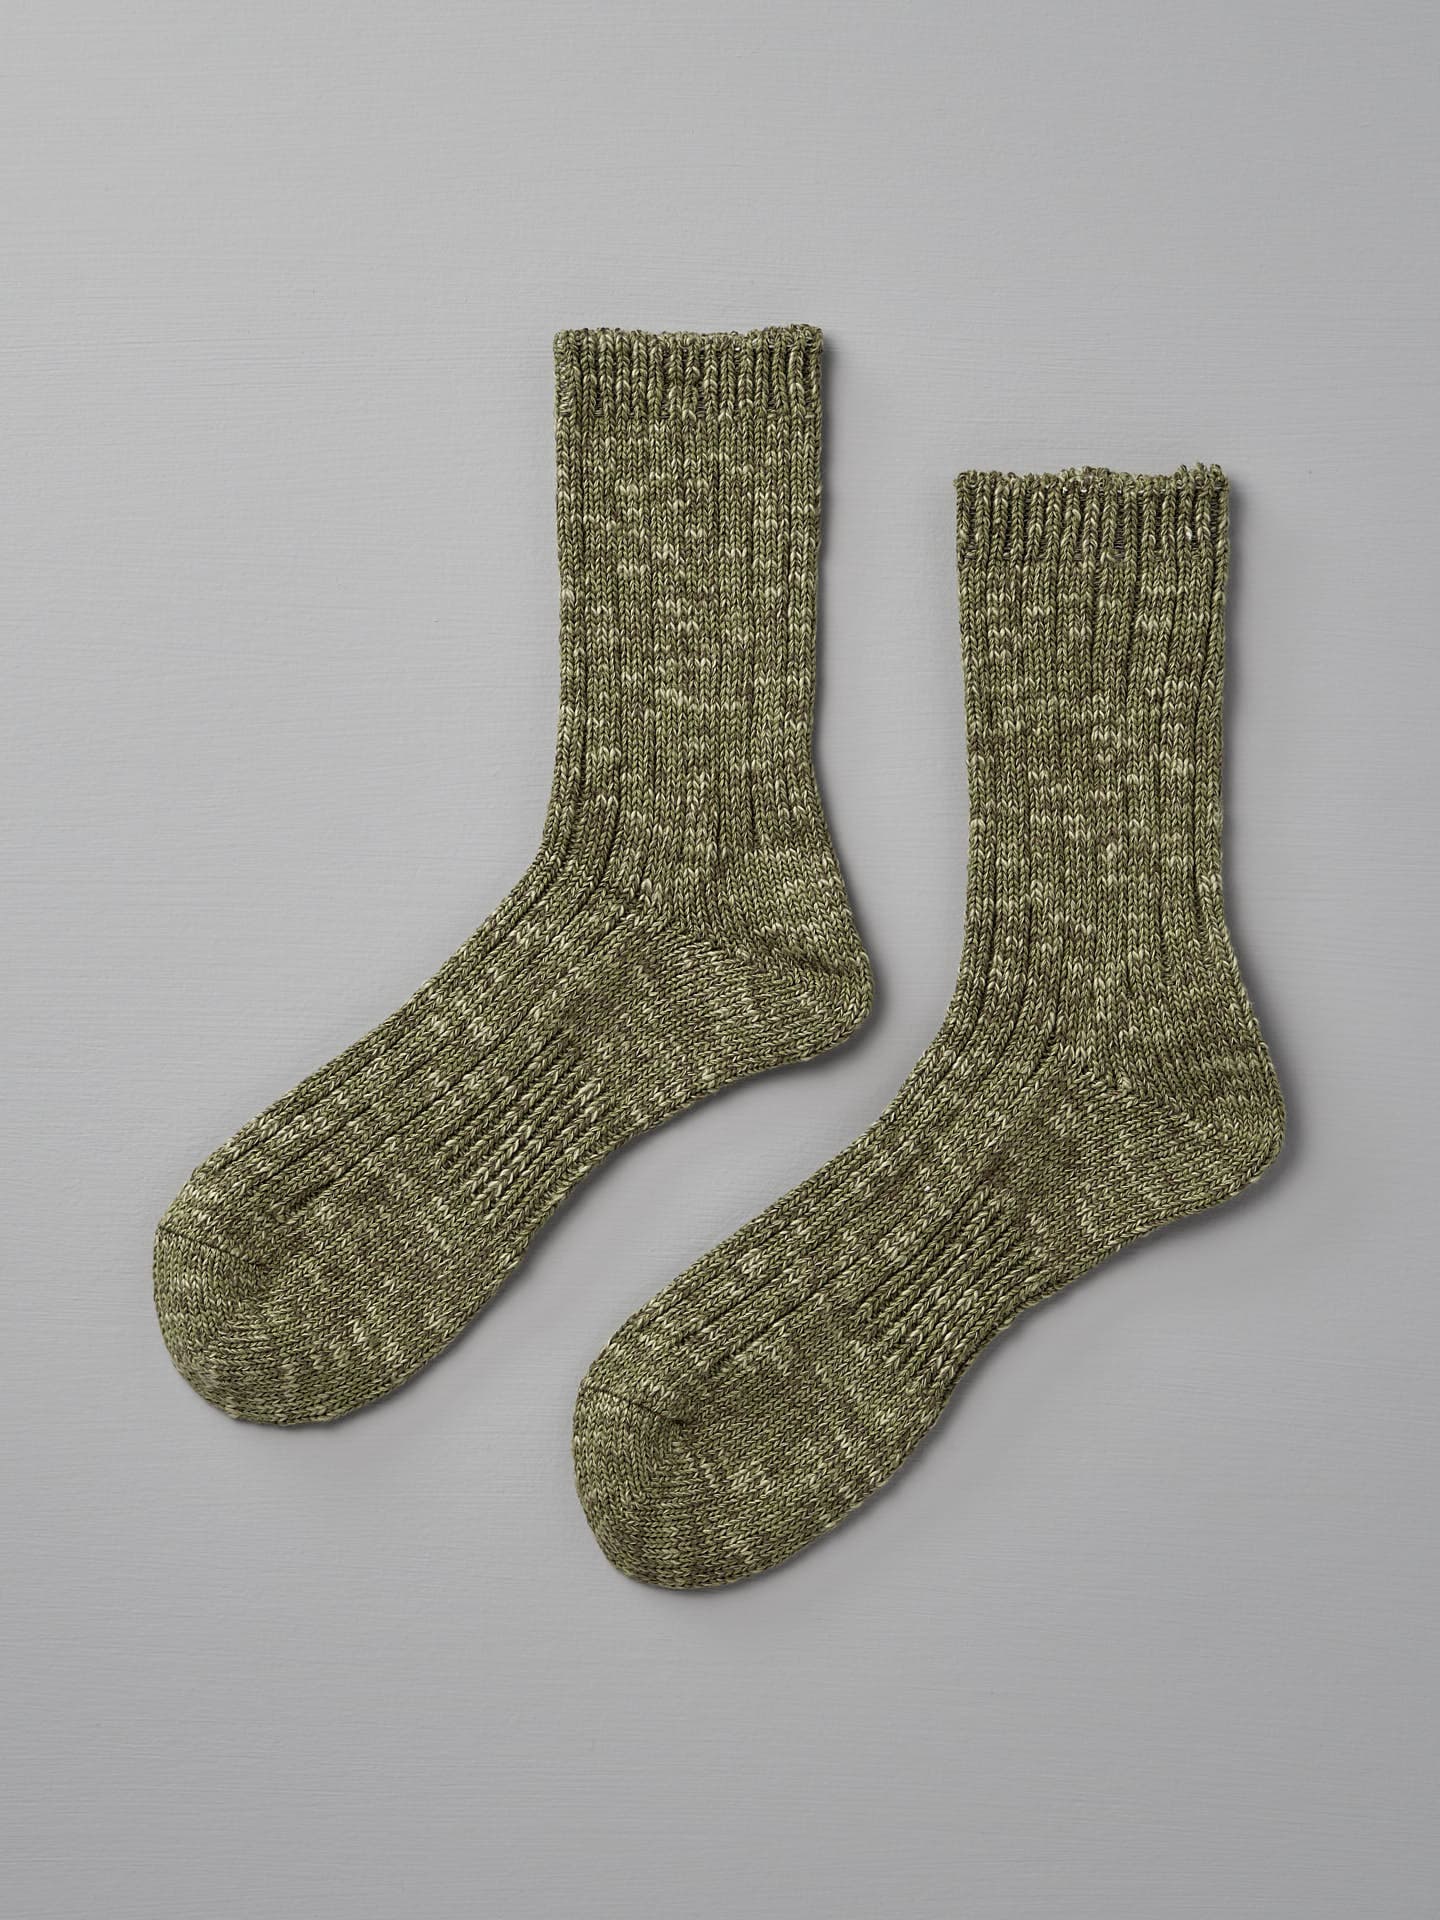 Two olive green, ribbed knit socks are displayed against a light gray background, fitting sizes EUR cm 23—25 and 35—38. The product is Japanese Slub Rib Socks – Green by Mauna Kea.